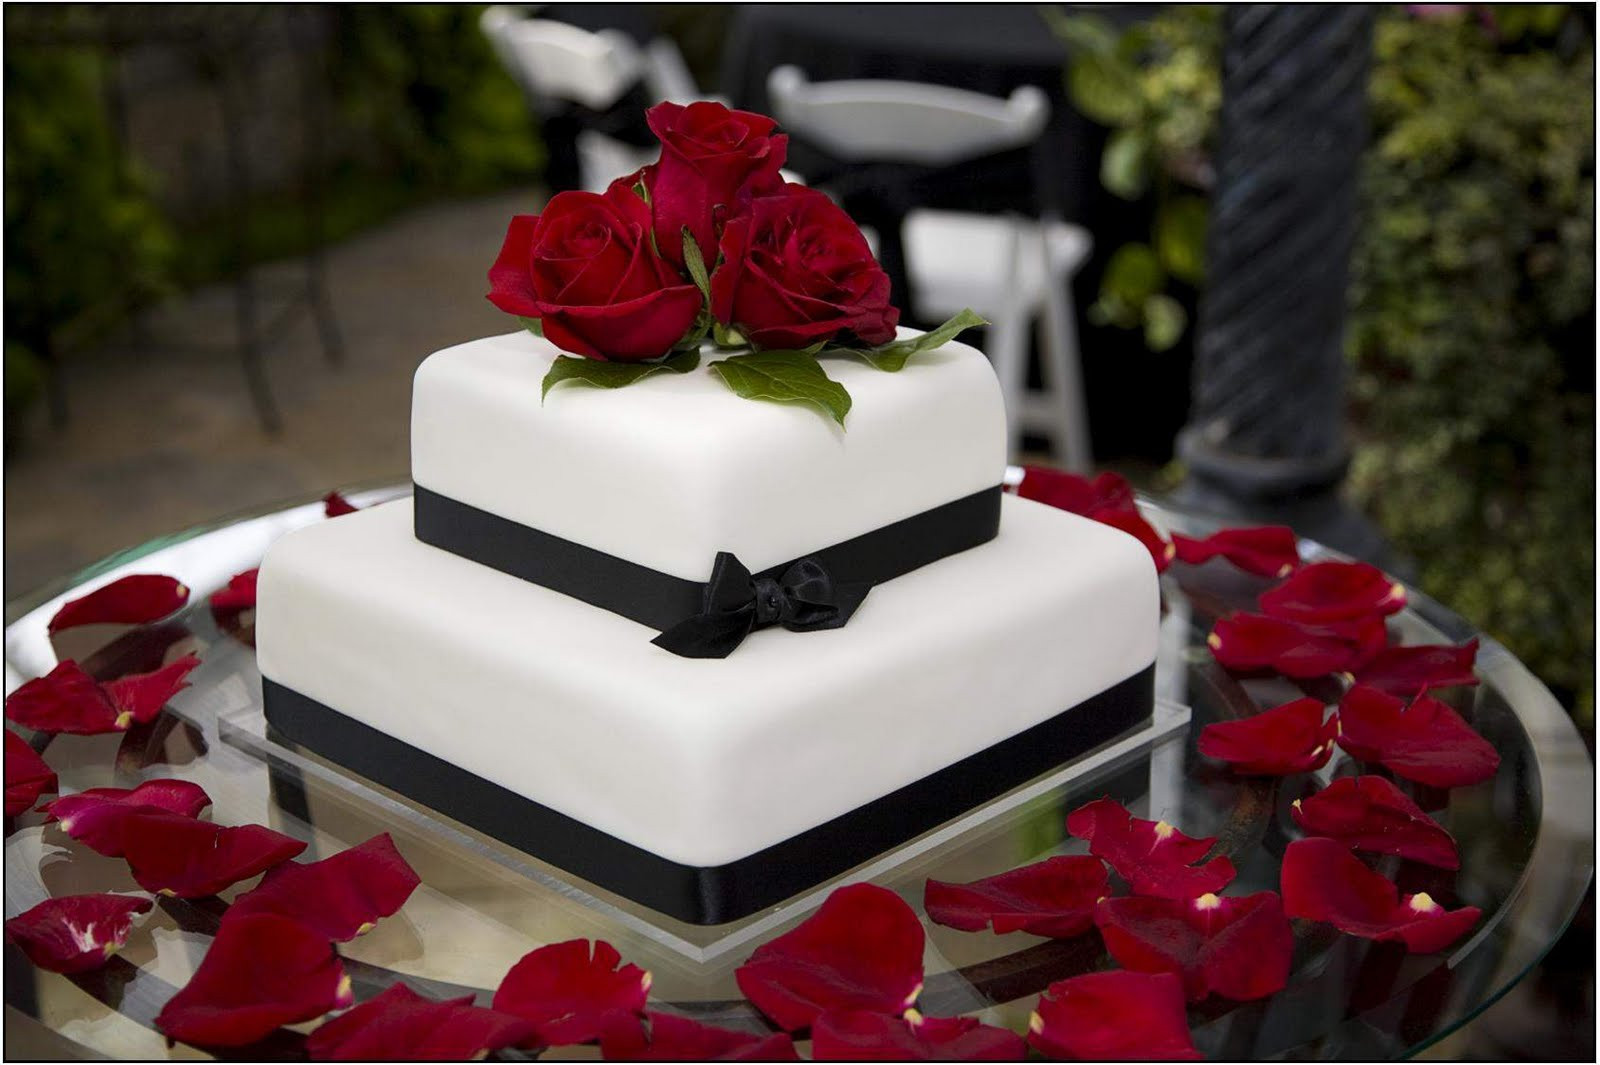 Square Wedding Cakes Pictures
 Delicious Square Wedding Cakes With Roses Ideas